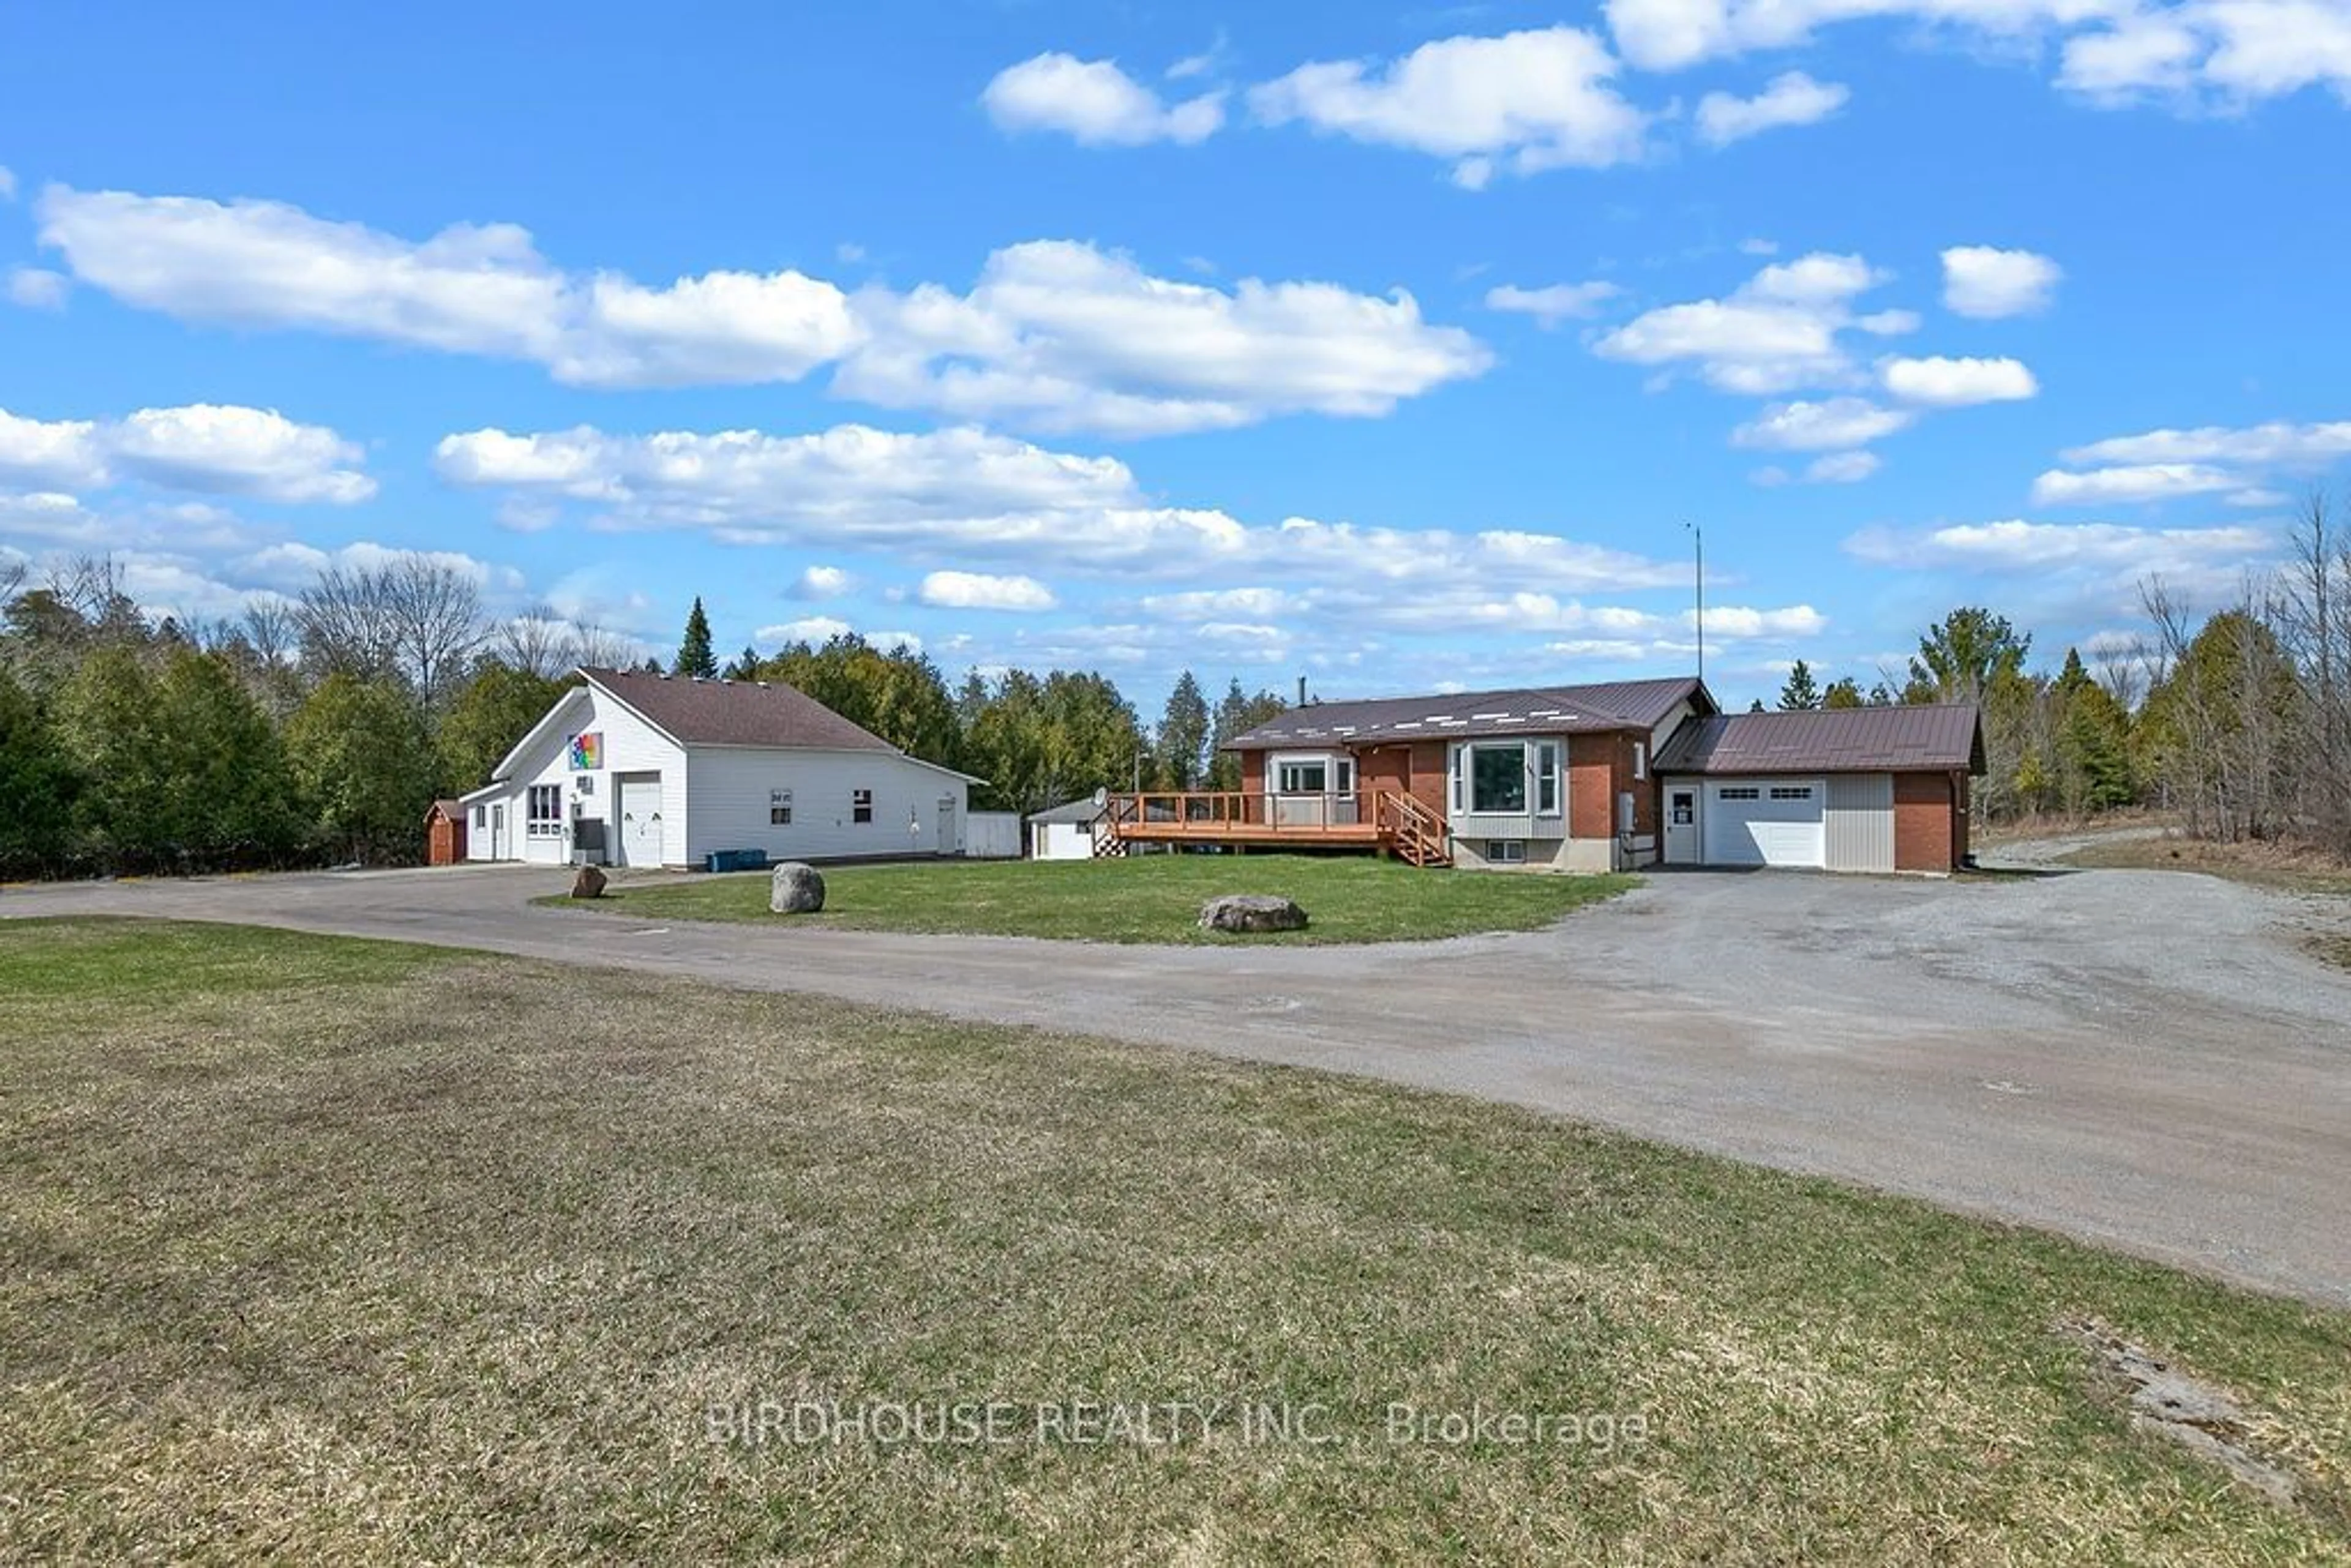 Street view for 1113 Highway 36, Galway-Cavendish and Harvey Ontario K0M 1A0